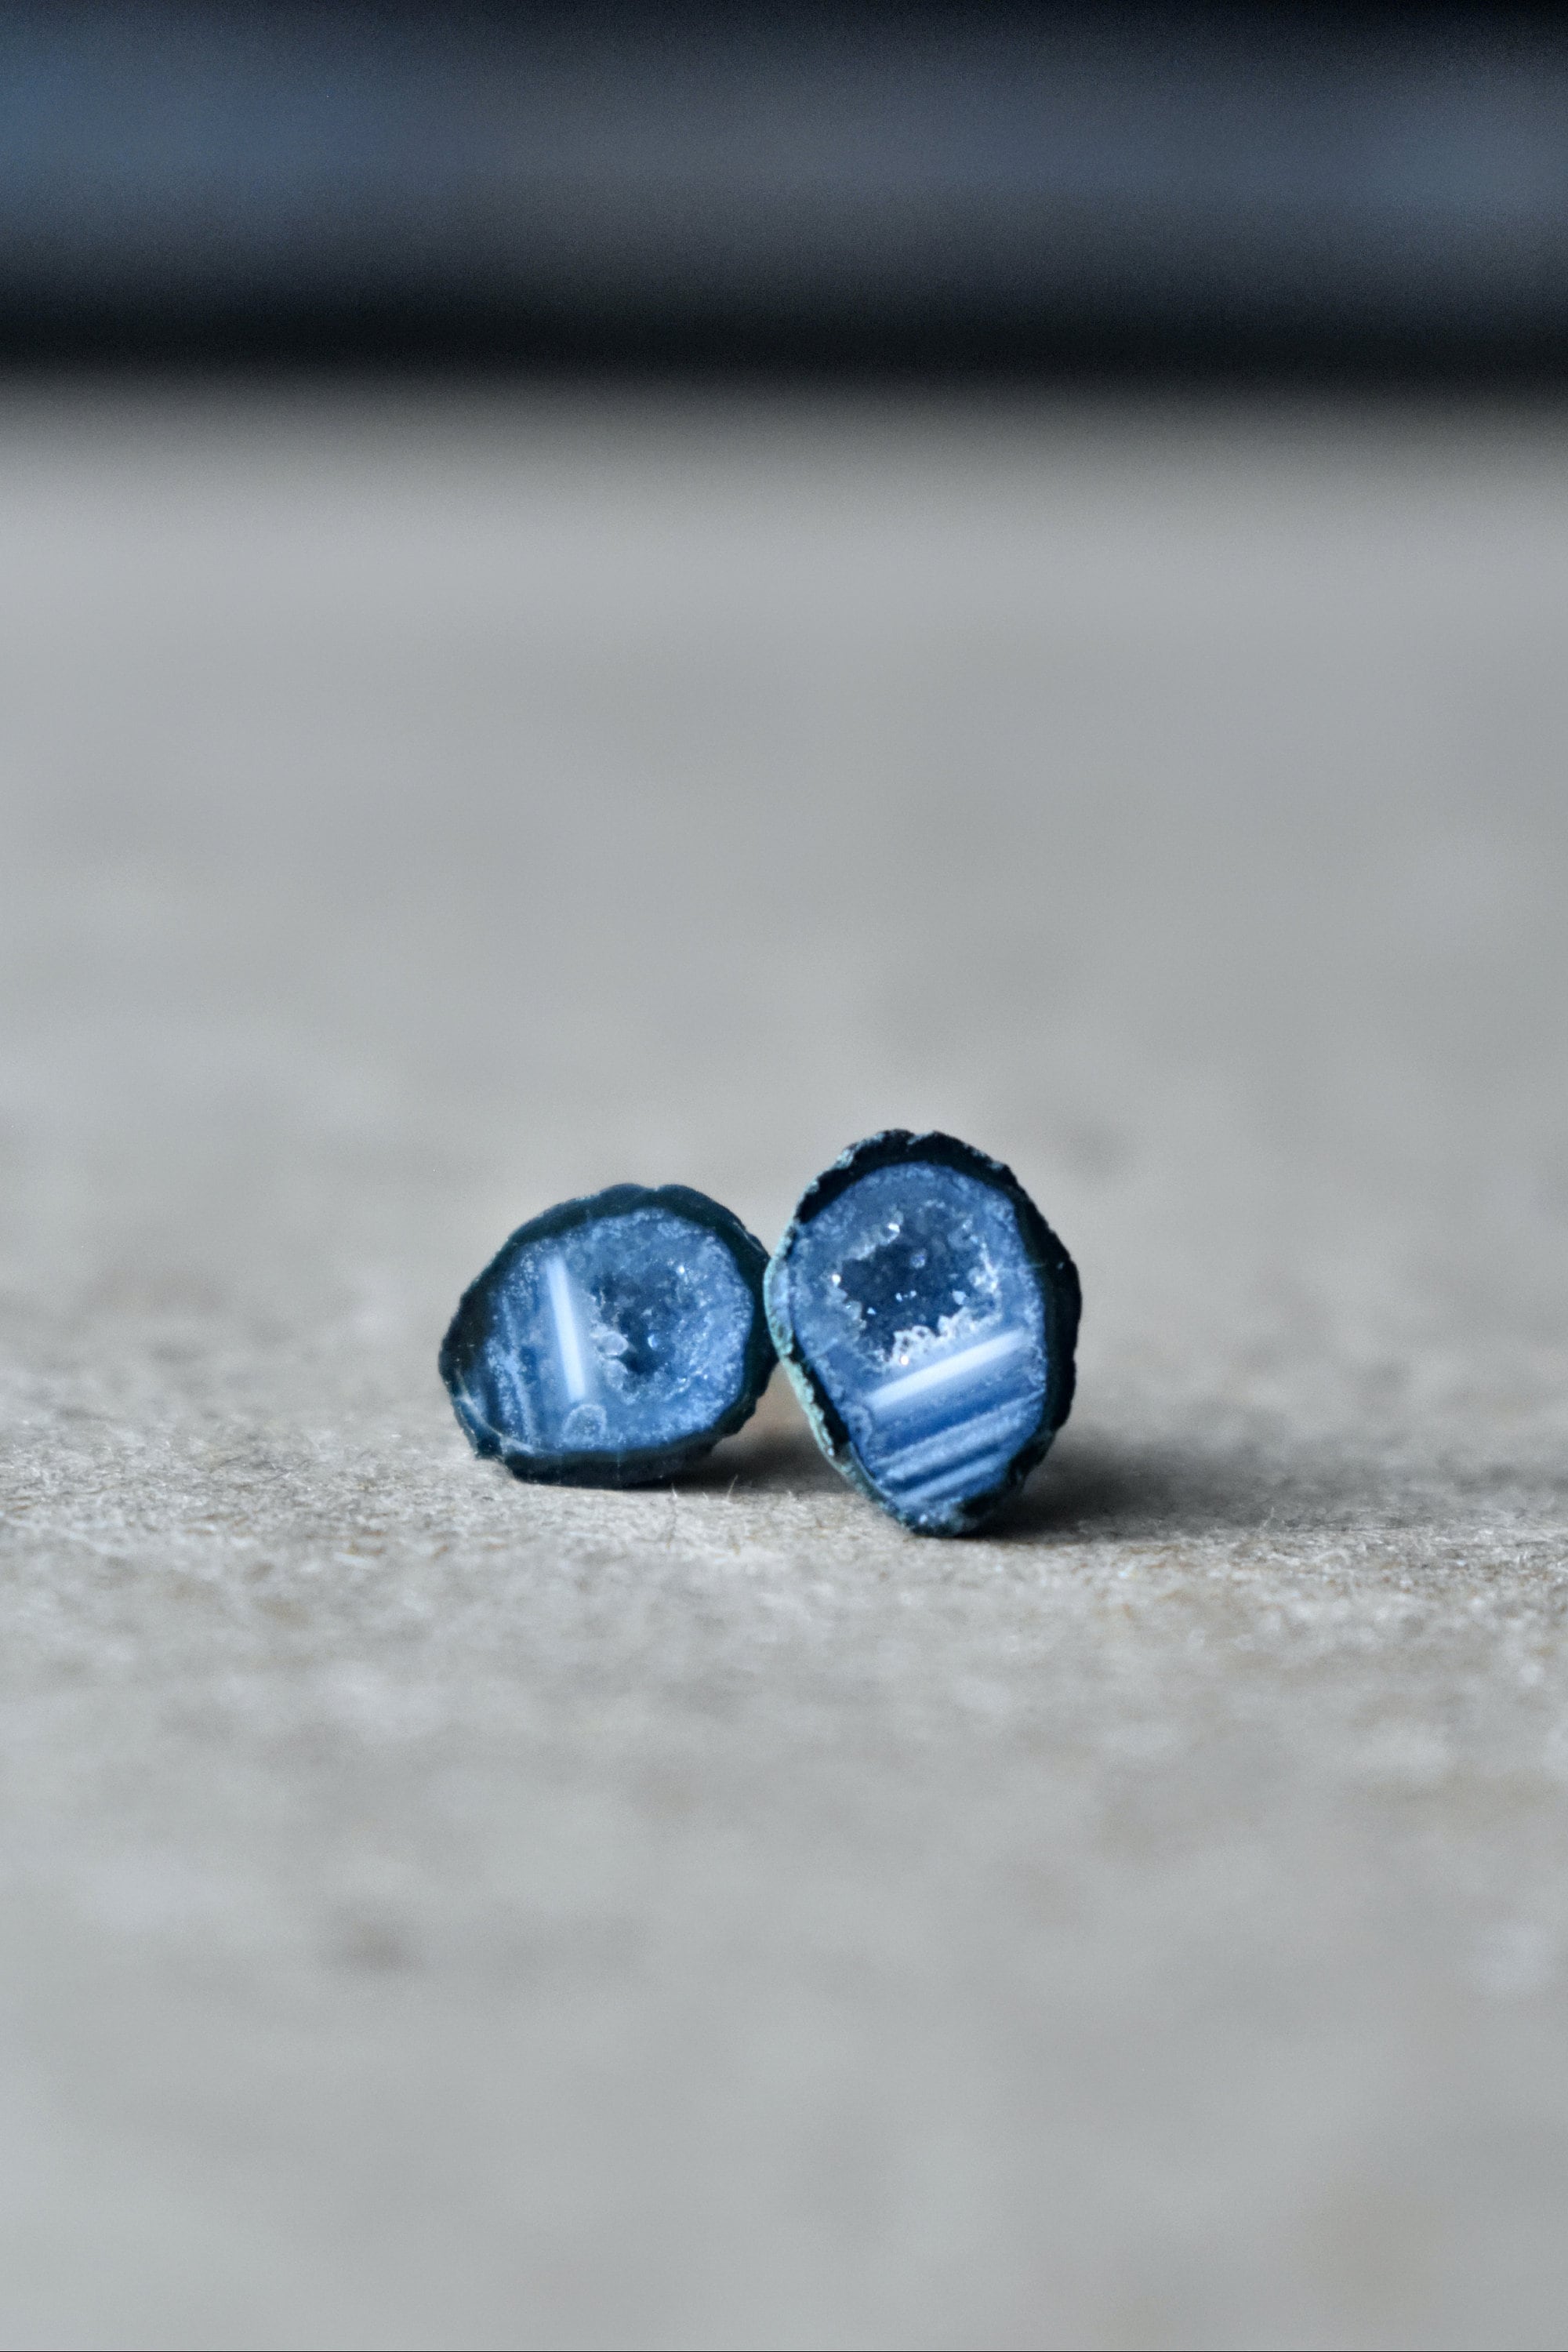 Tiny Blue Crystal Studs, The Smallest Geode Crystals, One of a Kind Geode Jewelry, Blue and Gold Fill Stud Earrings, Small Earlobe Studs